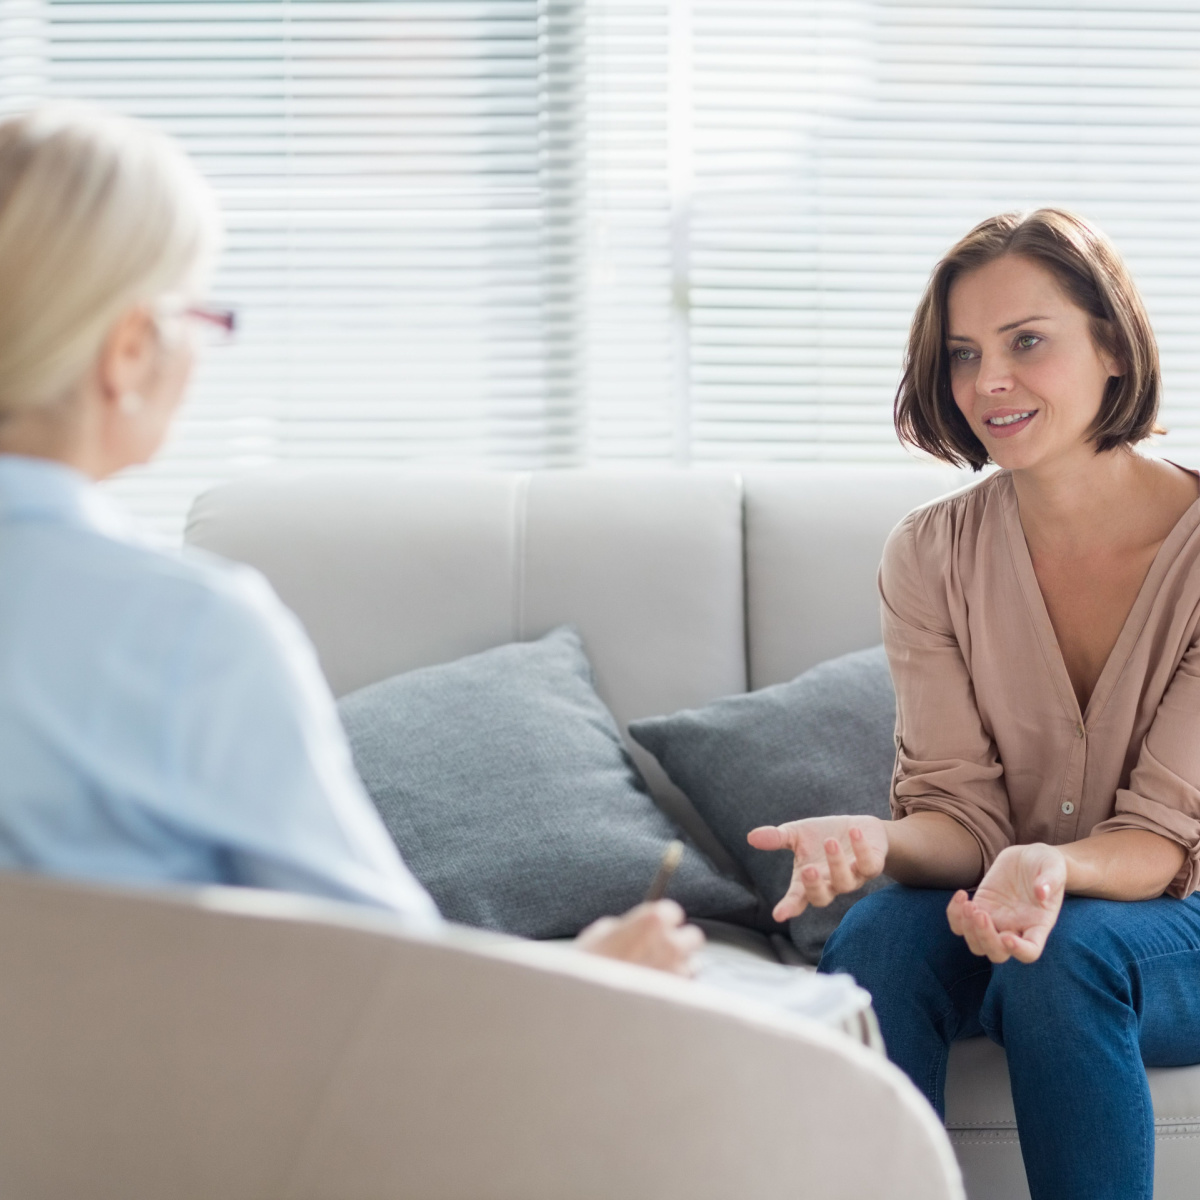 Genetic counseling in the Woodlands IVF